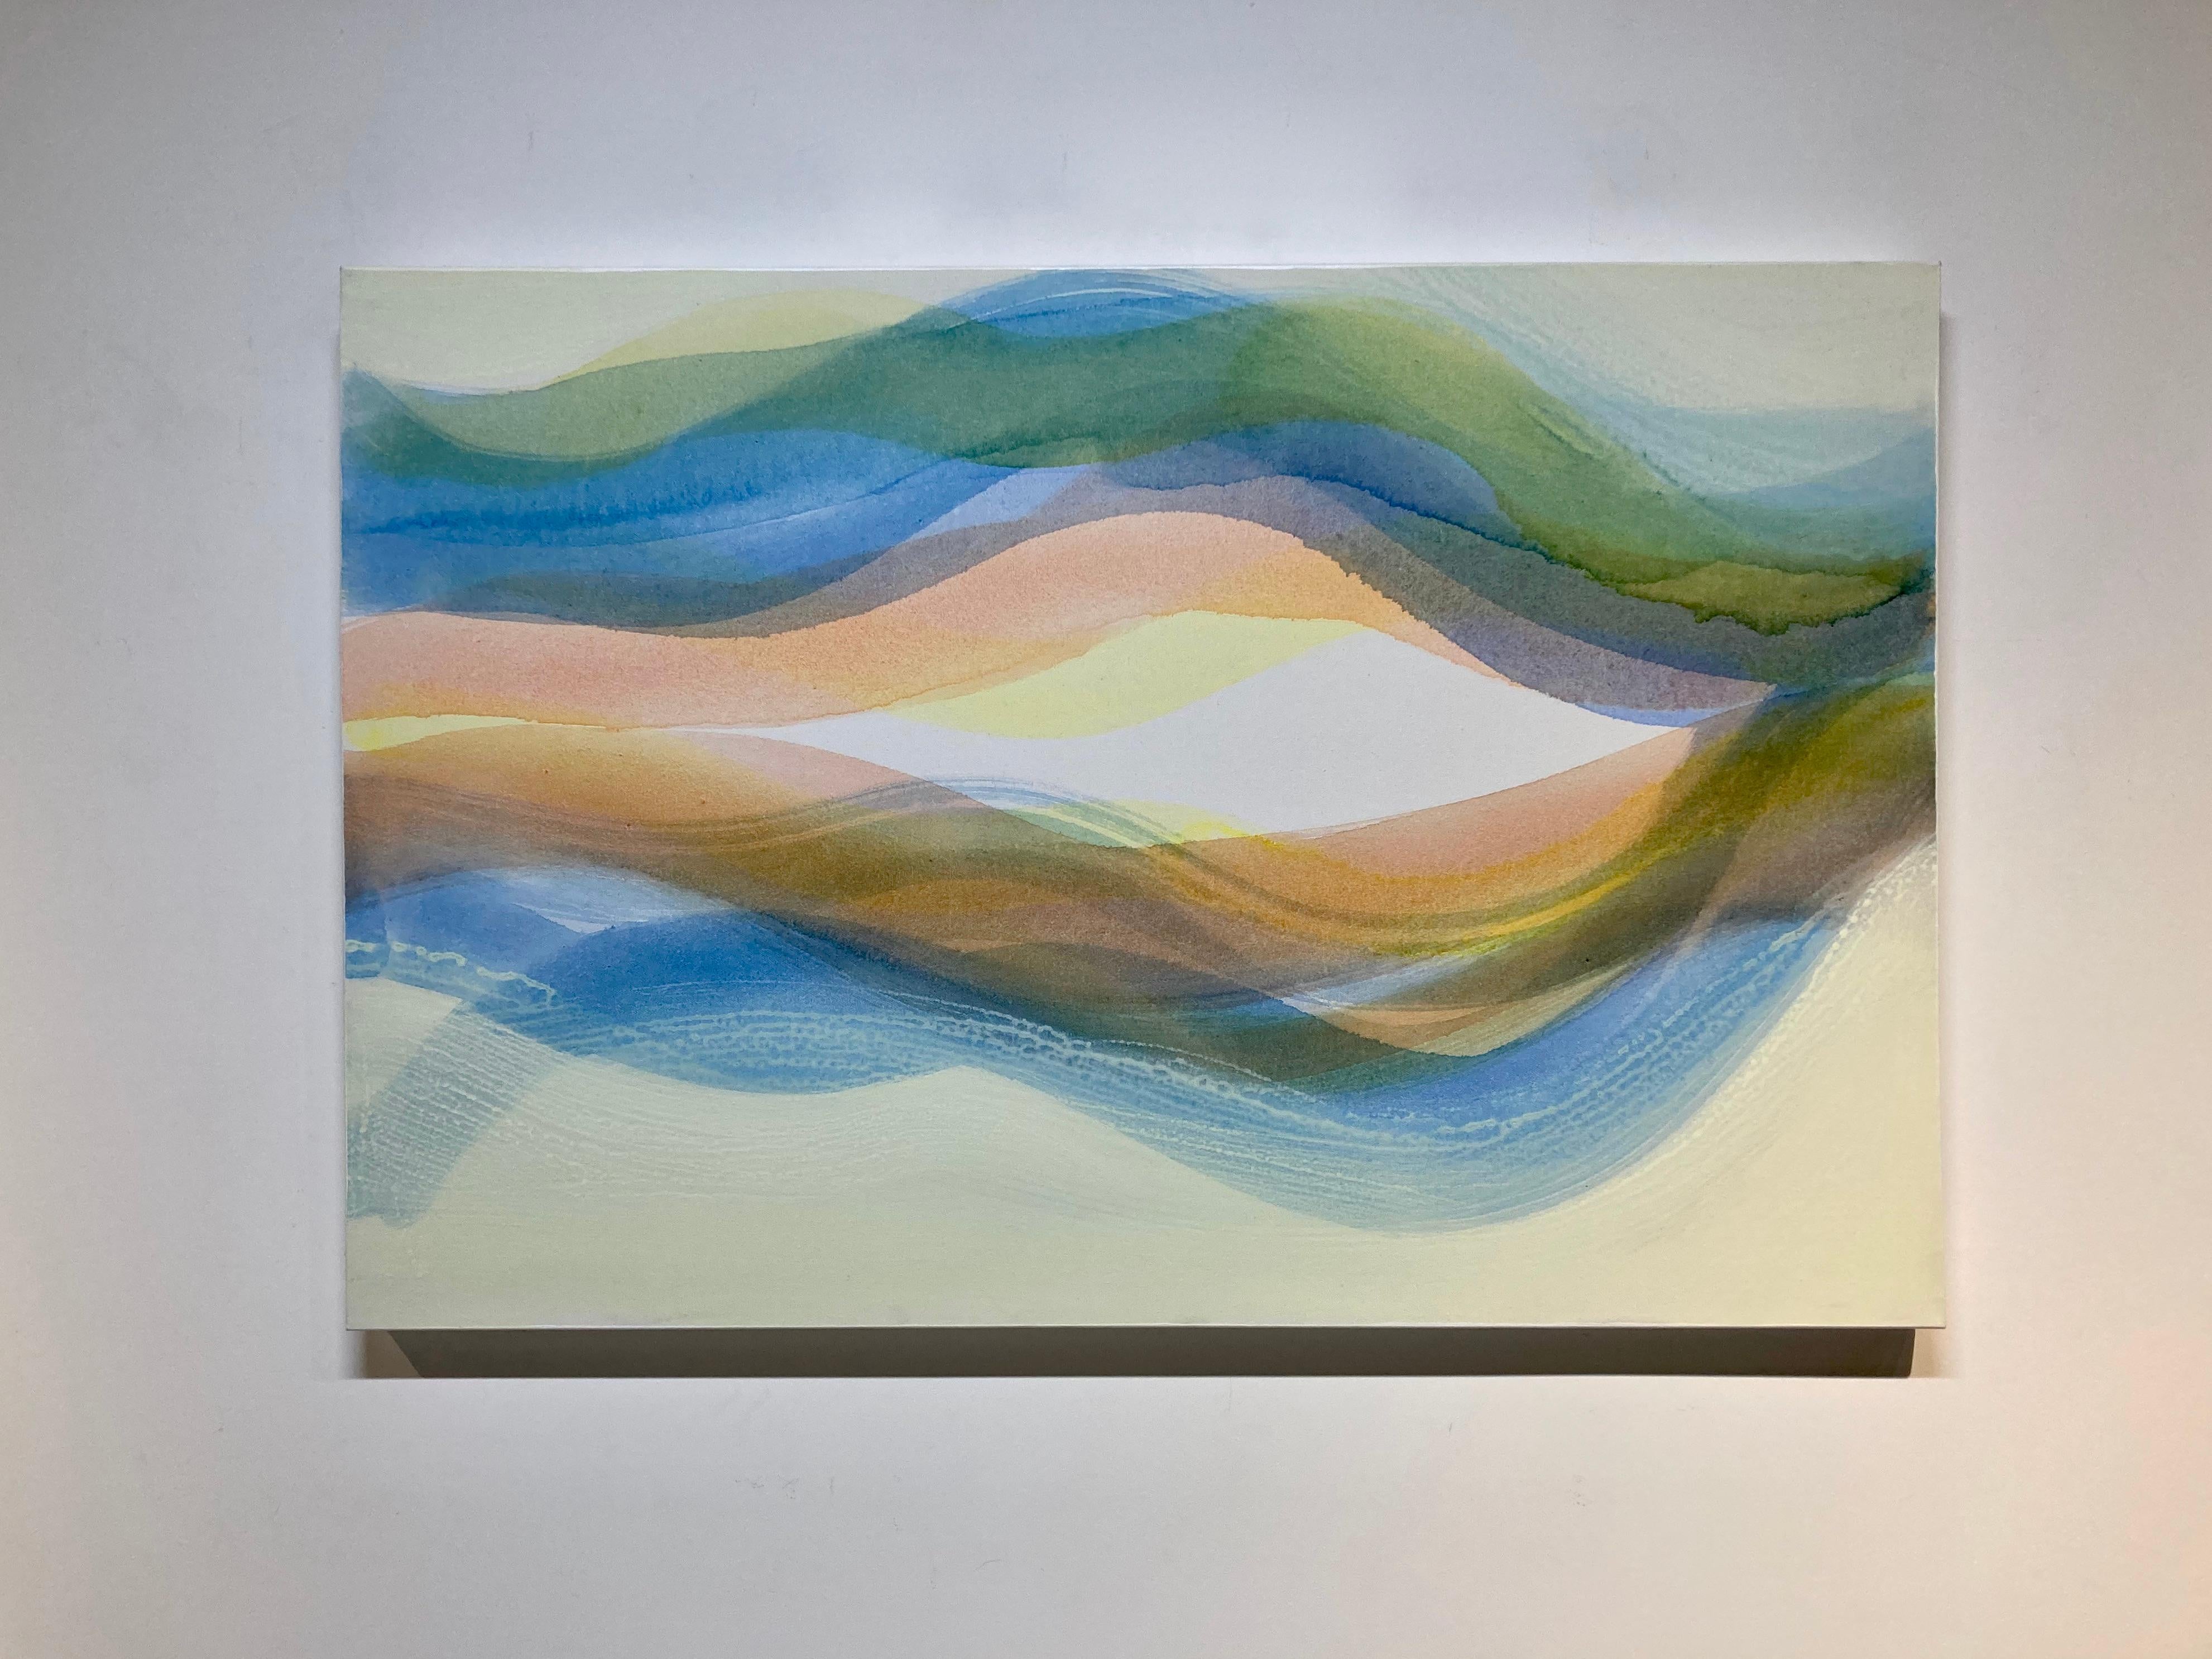 Locale, Blue, Light Peach Orange, Green, Soft Yellow Undulations, Color Waves - Painting by Margaret Neill